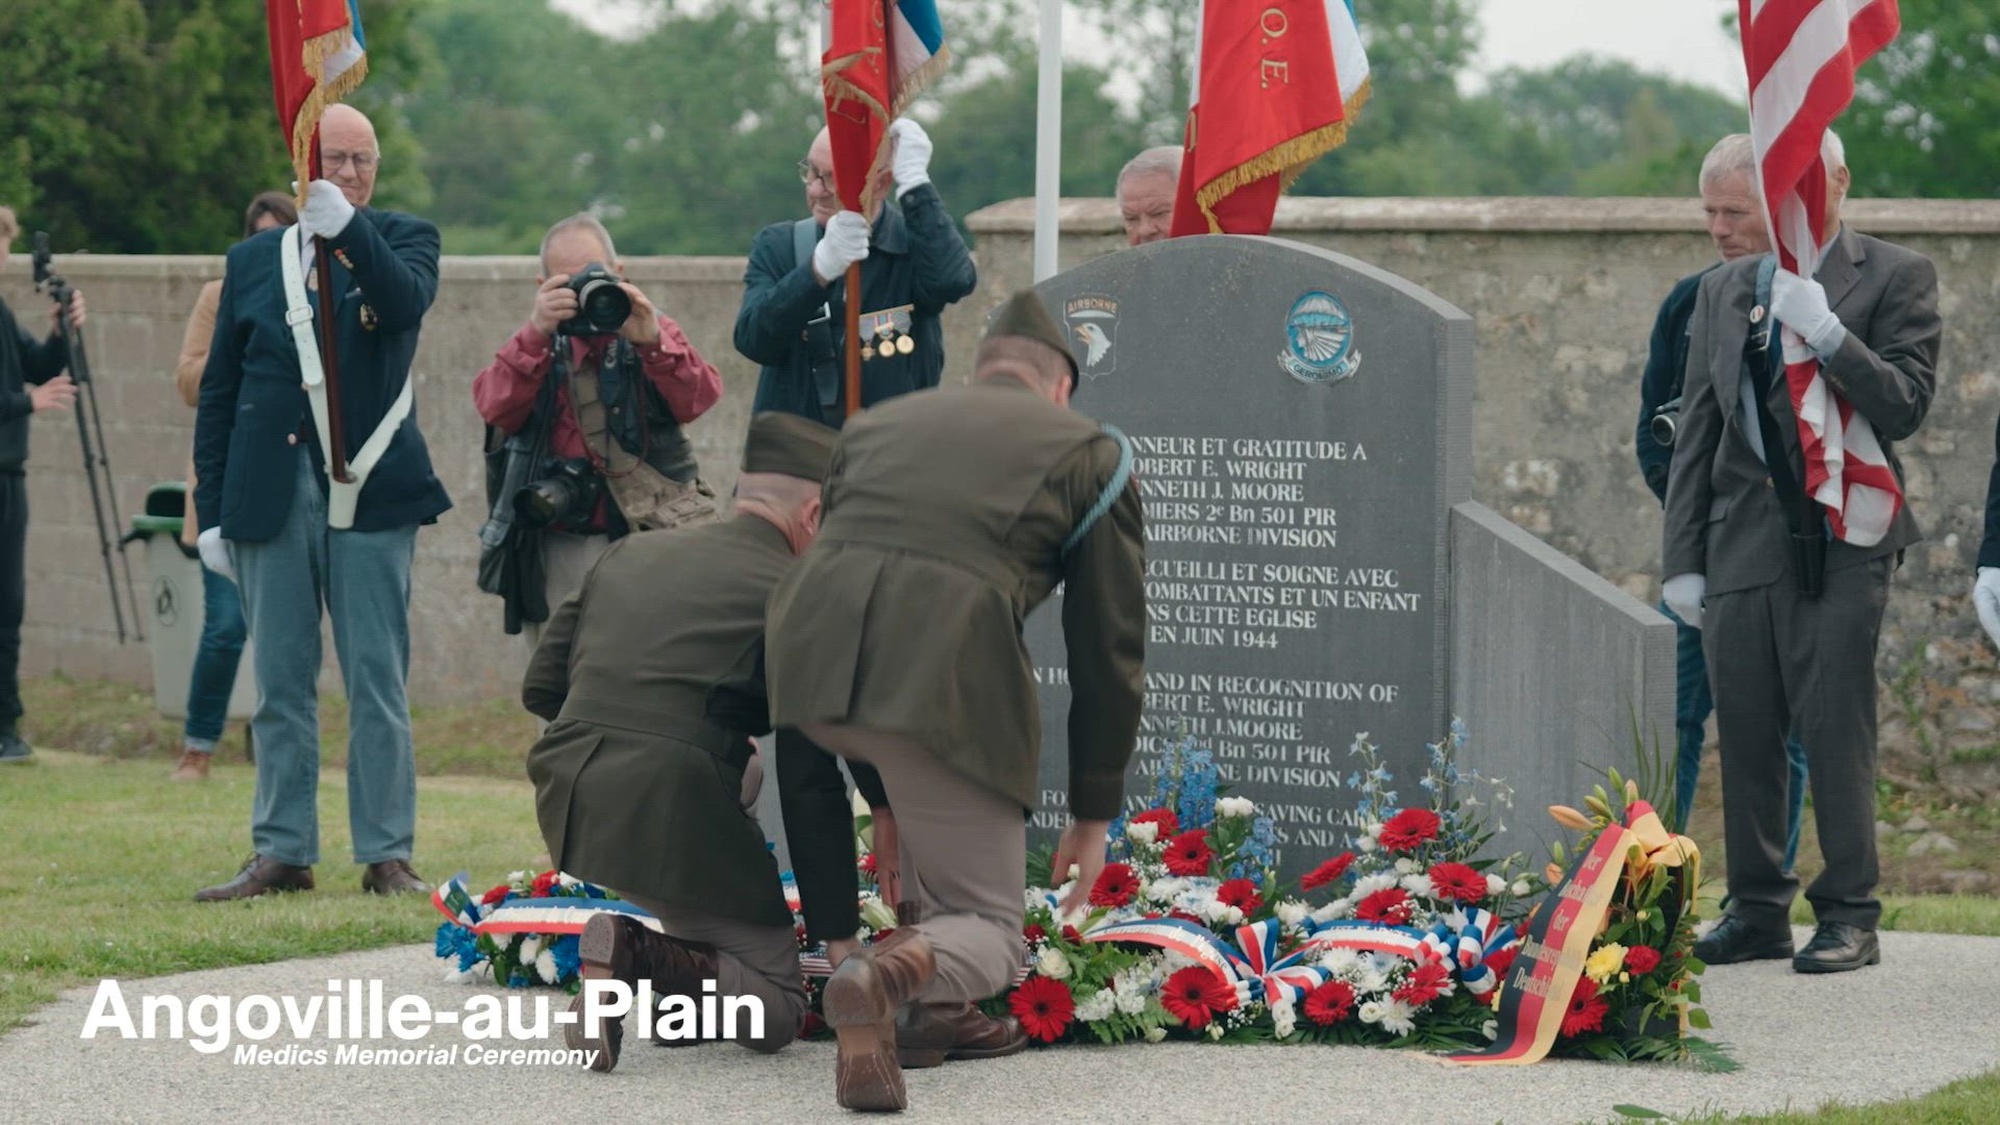 U.S and Allied Forces, World War II Veterans and Distinguished Guests attend the Angoville-au-Plain Memorial Ceremony in Angoville-au-Plain, France on June 1, 2024. The 101st Airborne Division (Air Assault) is forever linked to the people of Normandy, especially Carentan. The division fought and sacrificed for the freedom and peace that exists today in France.